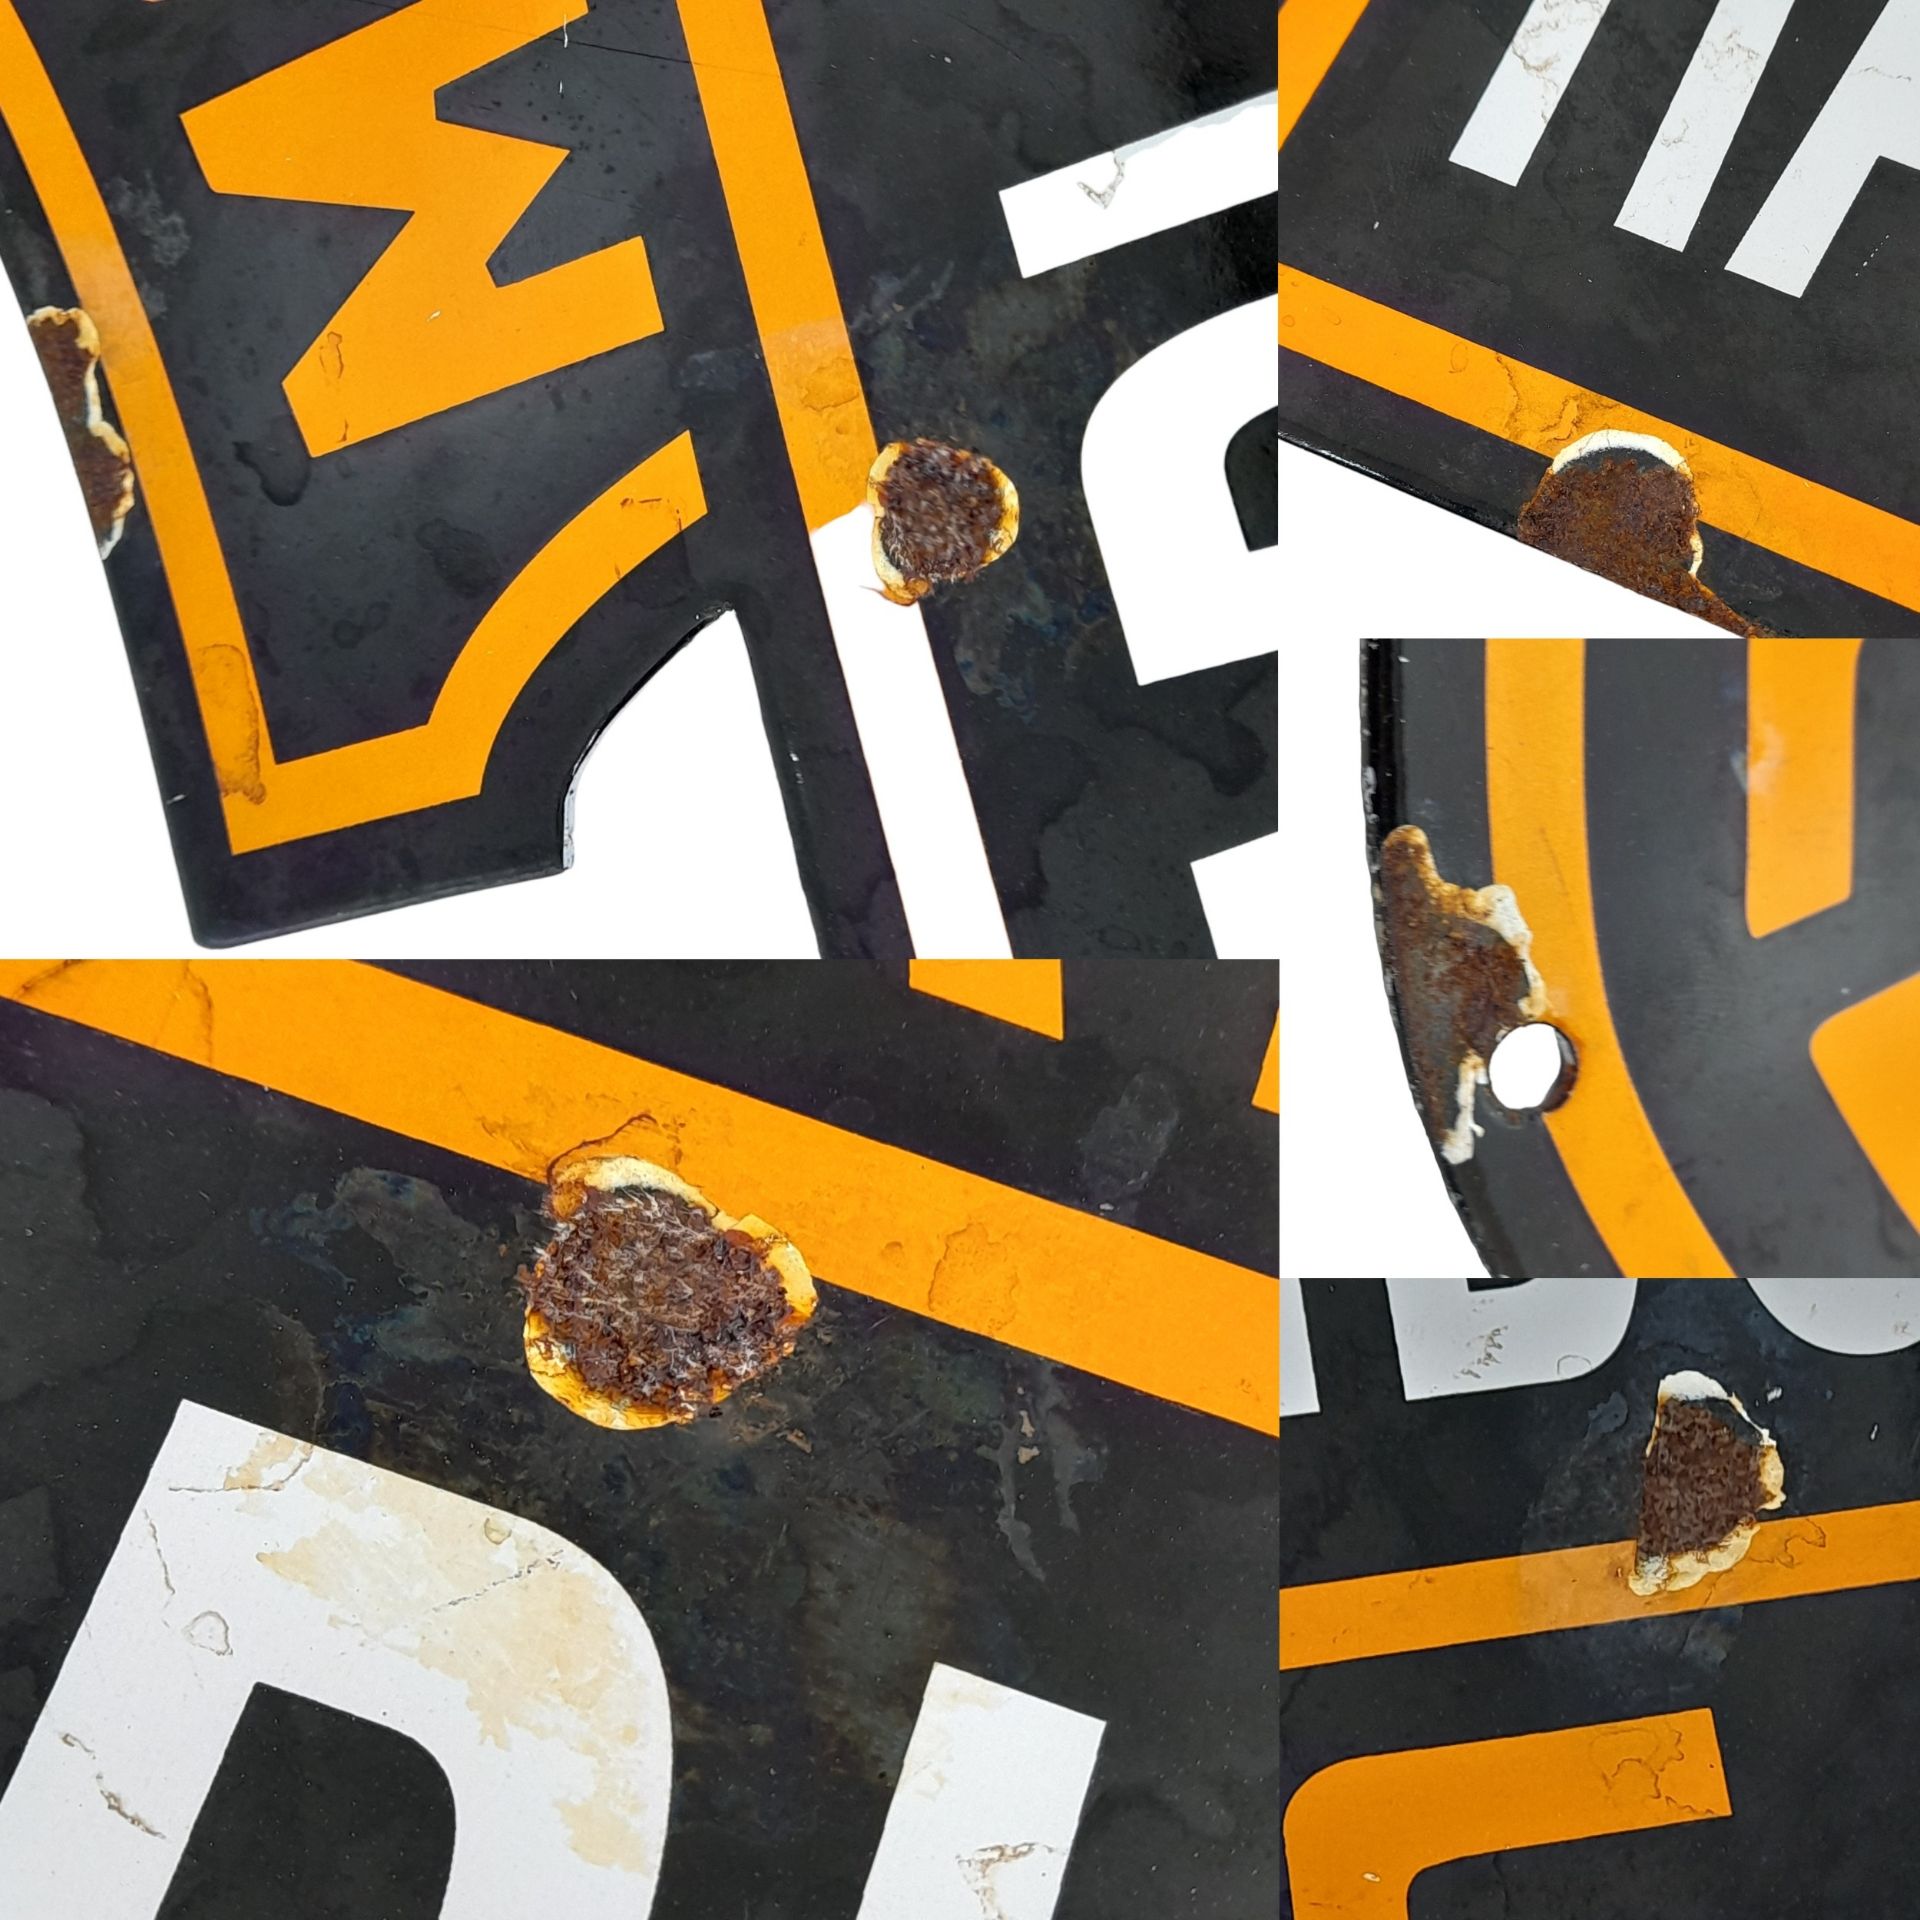 A Vintage Repro Harley Davidson Die-Cut Enamel sign. In good condition - a few small rust marks - Image 3 of 3